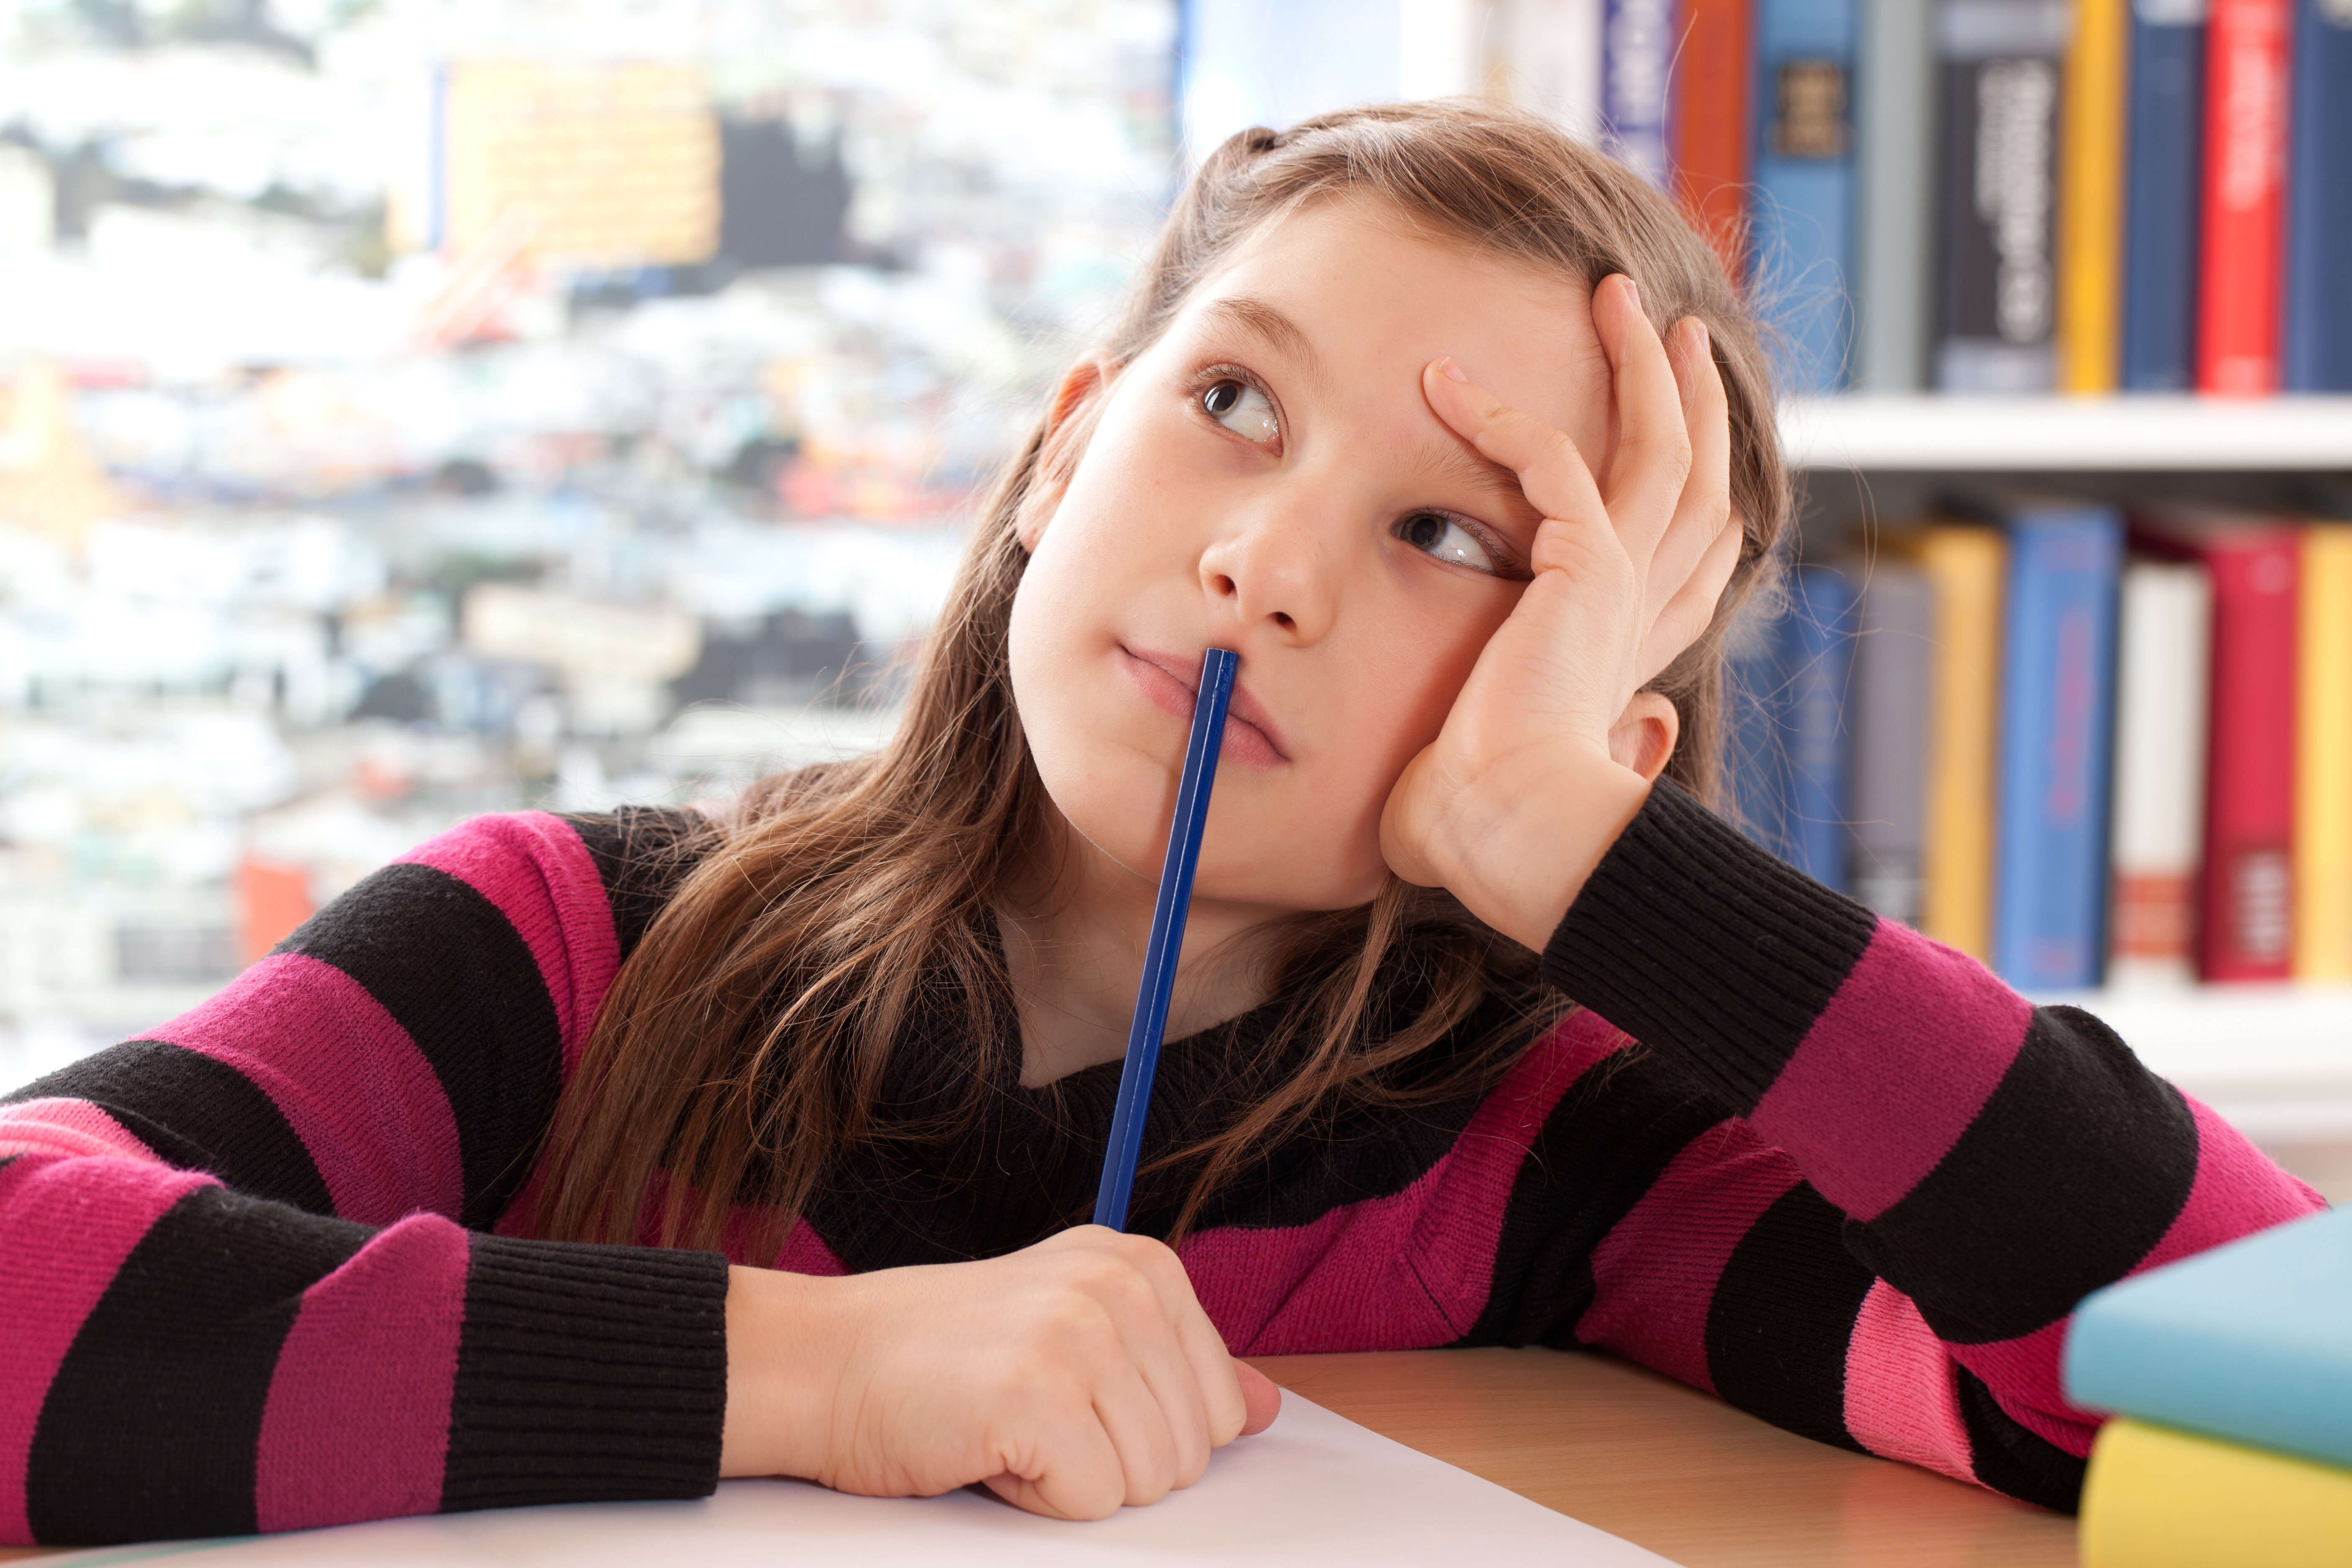 Young girl holding pencil, deep in thought